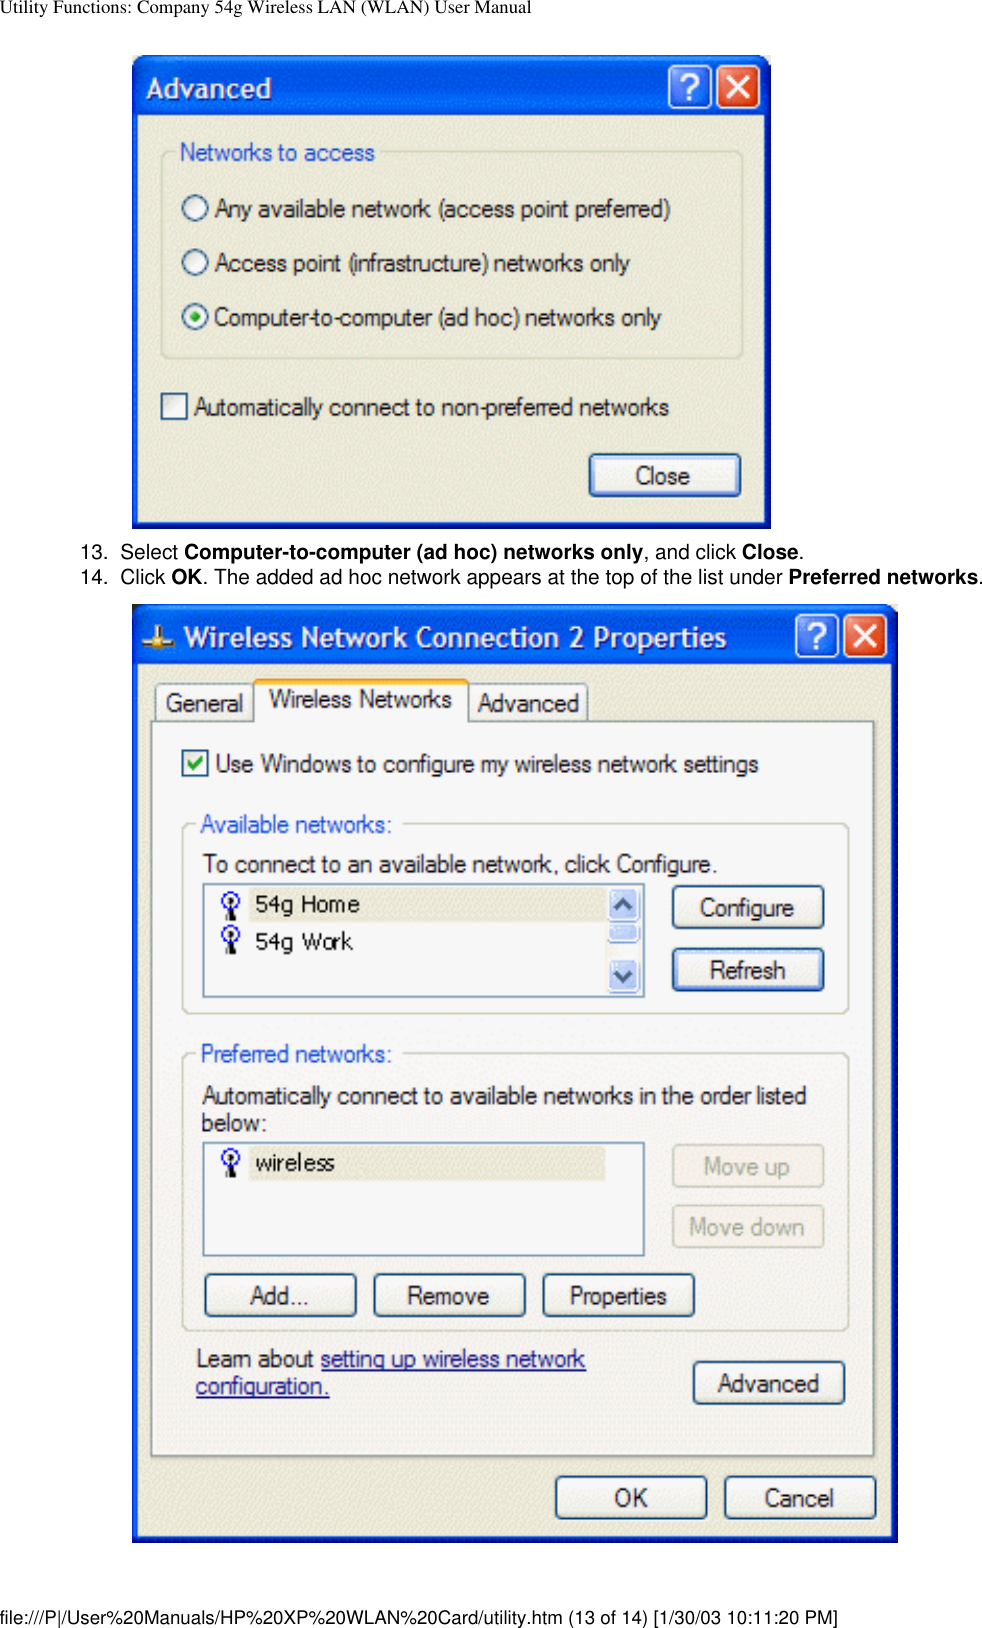 Utility Functions: Company 54g Wireless LAN (WLAN) User Manual13.  Select Computer-to-computer (ad hoc) networks only, and click Close. 14.  Click OK. The added ad hoc network appears at the top of the list under Preferred networks. file:///P|/User%20Manuals/HP%20XP%20WLAN%20Card/utility.htm (13 of 14) [1/30/03 10:11:20 PM]